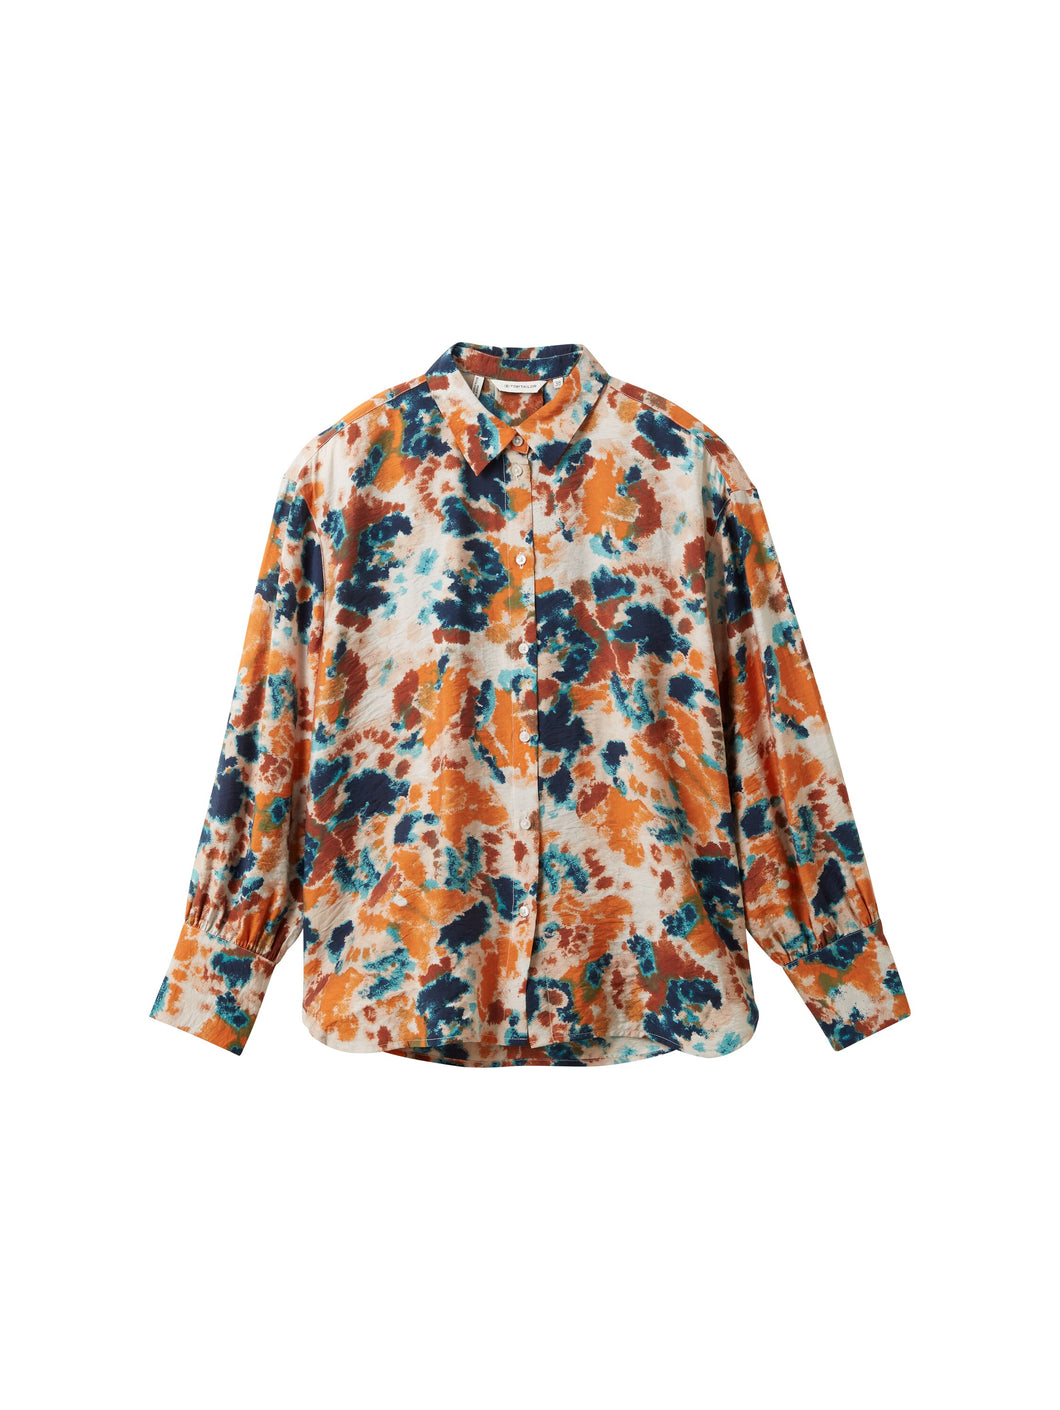 TOM TAILOR PRINTED BLOUSE WITH COLLAR grey orange tie dye floral